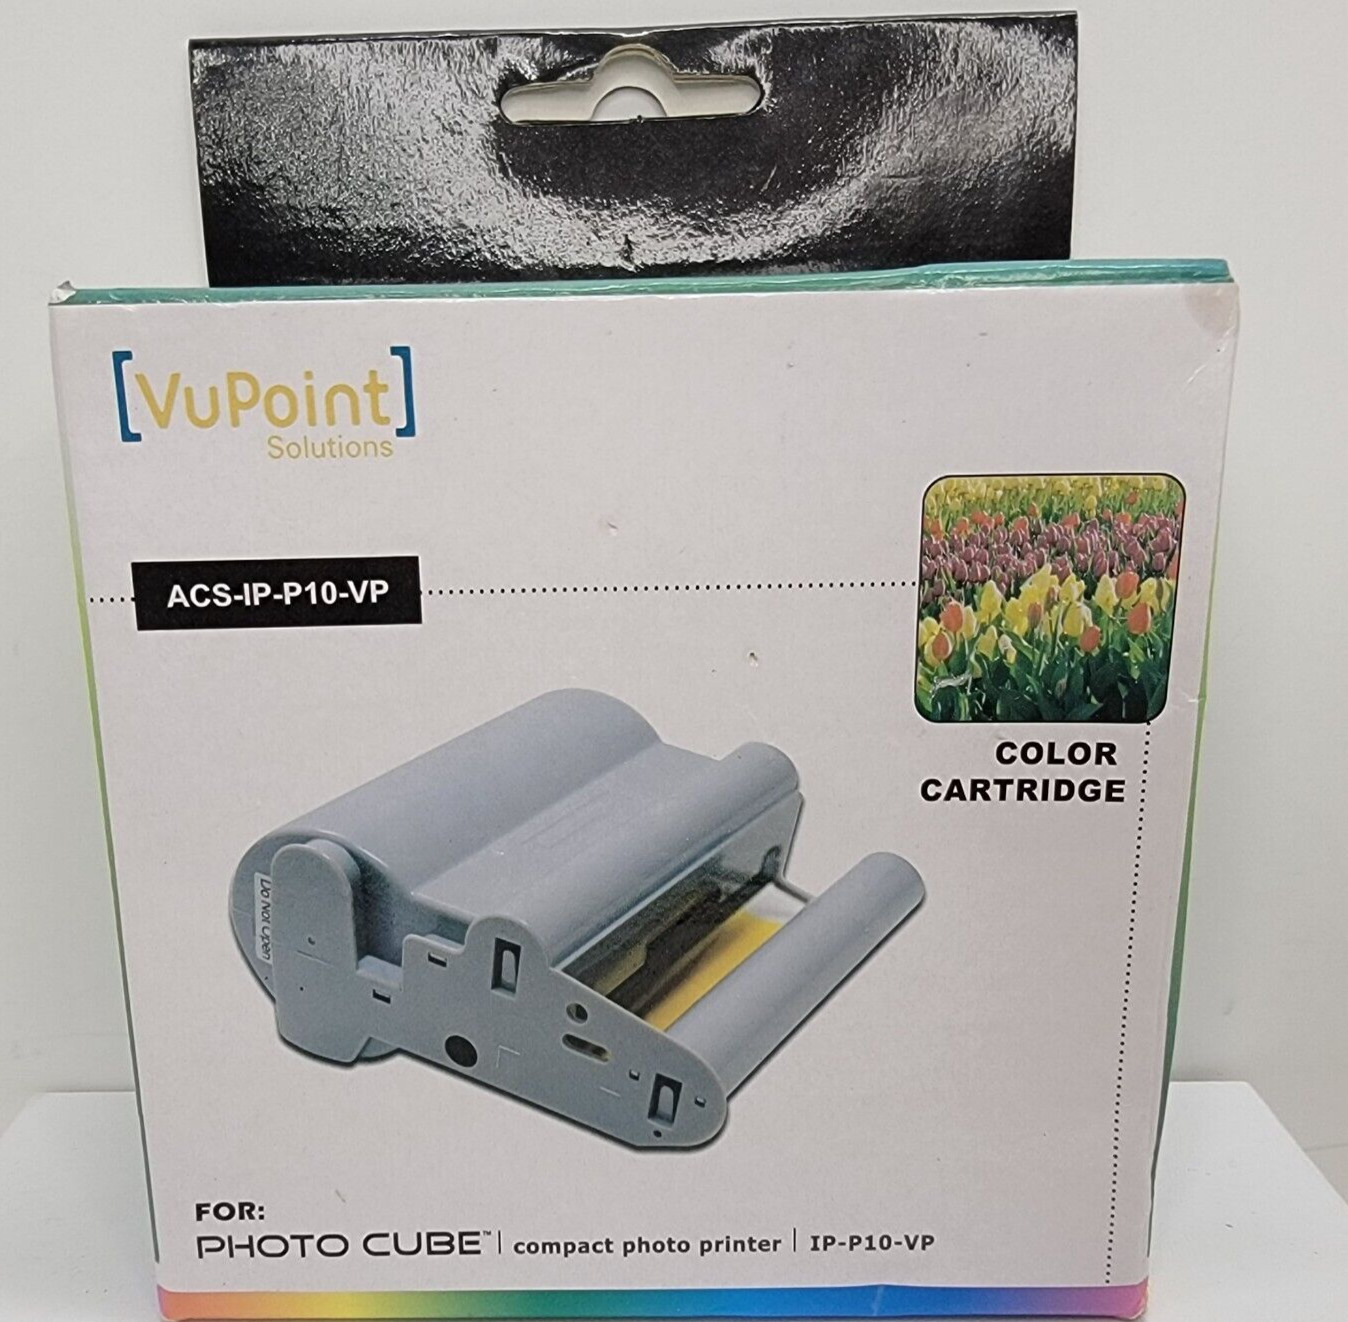 VuPoint Solutions ACS-IP-P10-VP Color Cartridge for Photo Cube - NEW